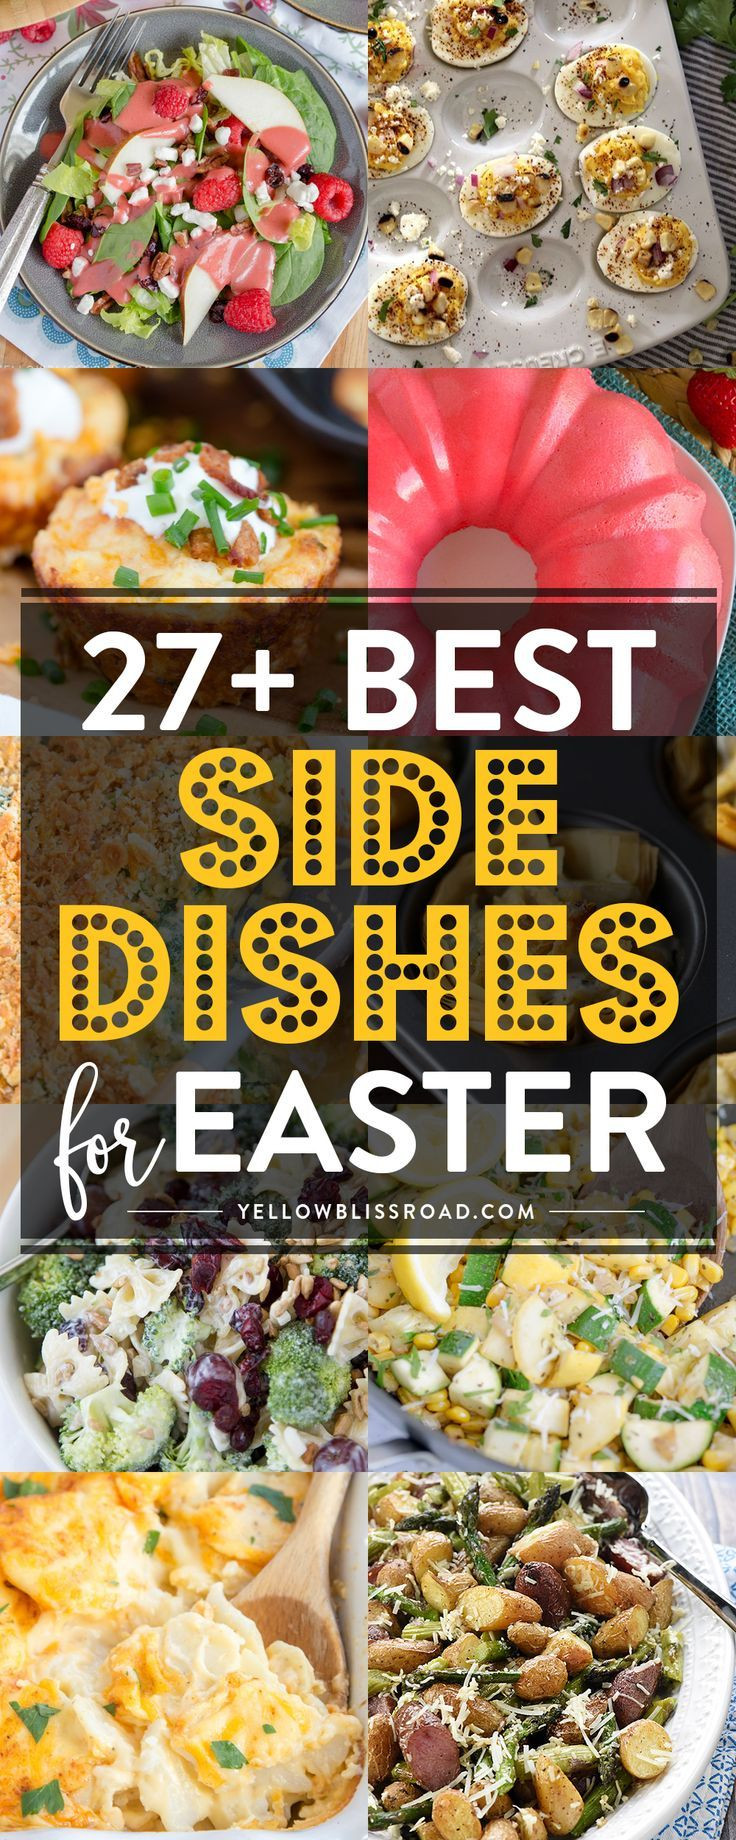 Easter Lunch Side Dishes
 25 best ideas about Easter Dishes on Pinterest